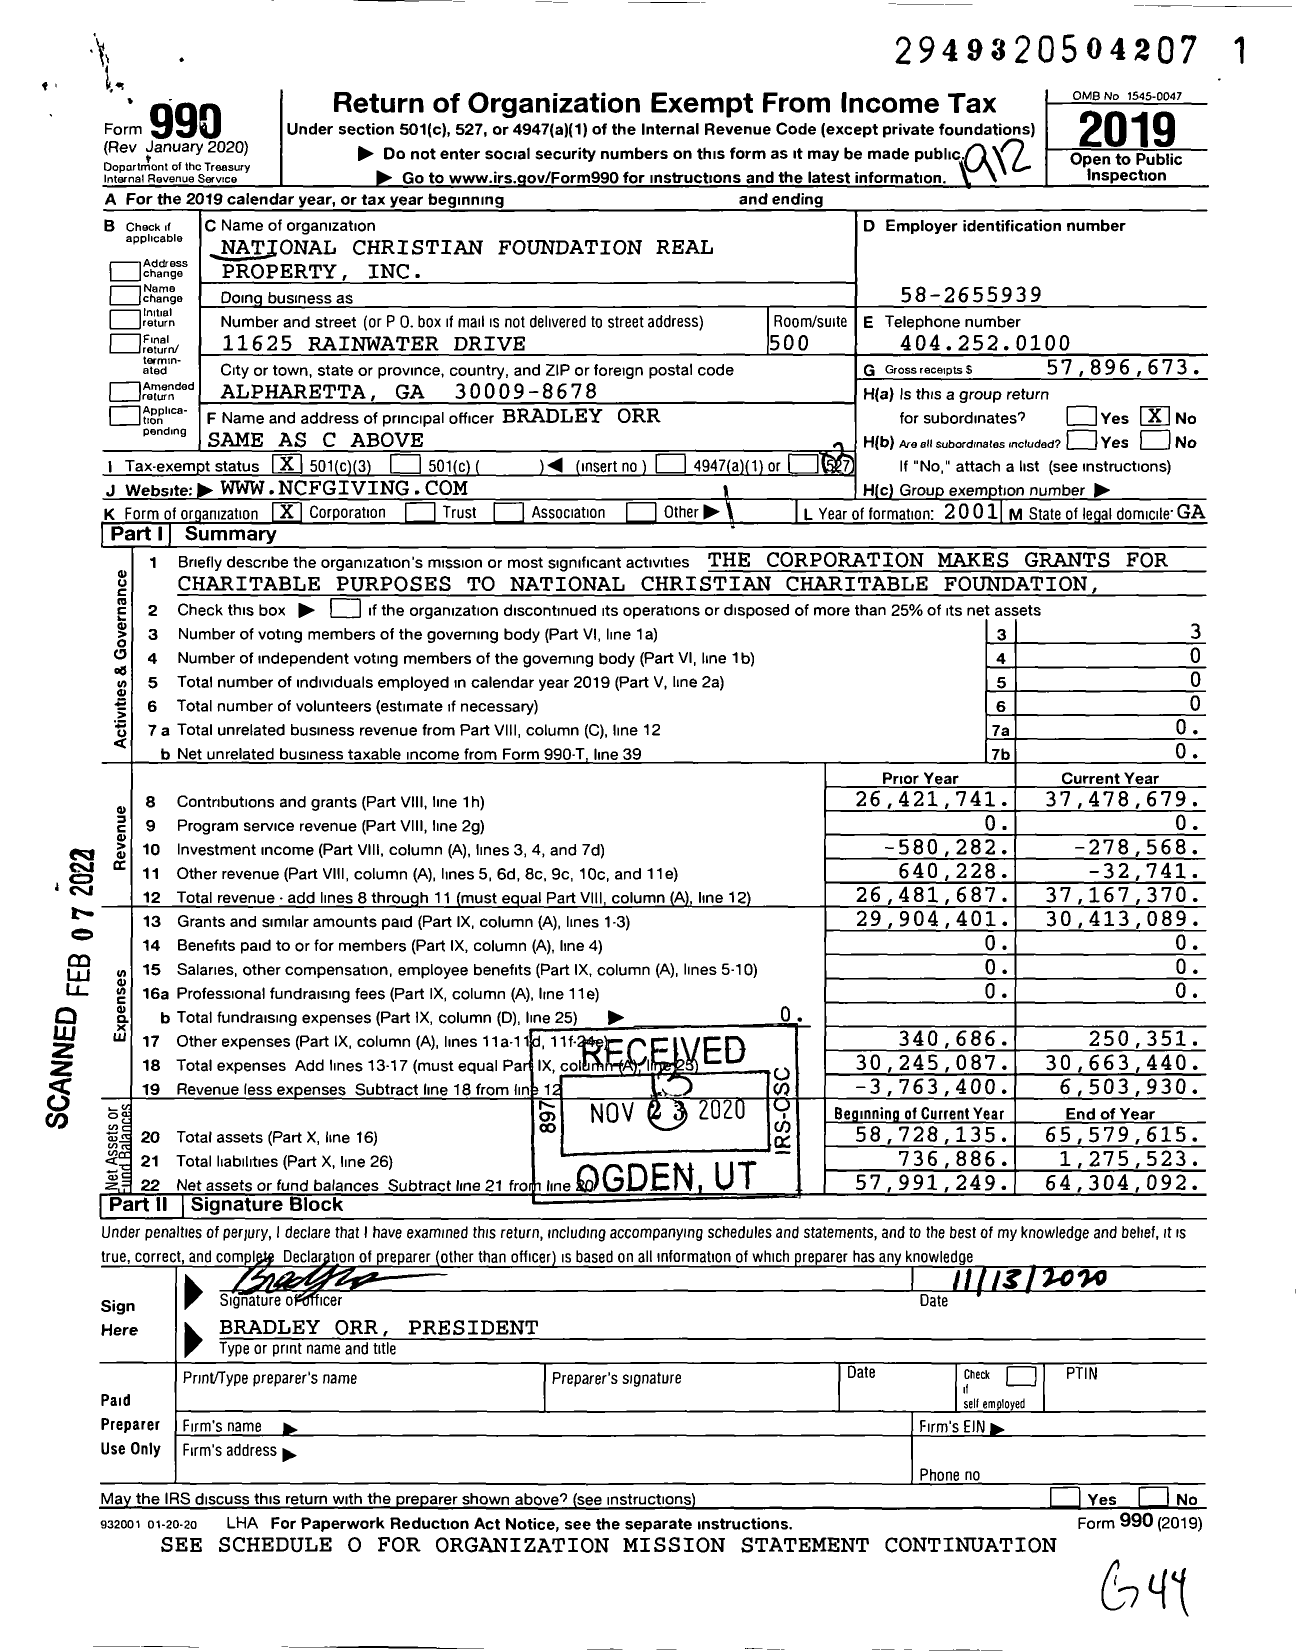 Image of first page of 2019 Form 990 for National Christian Foundation Real Property (NCF)